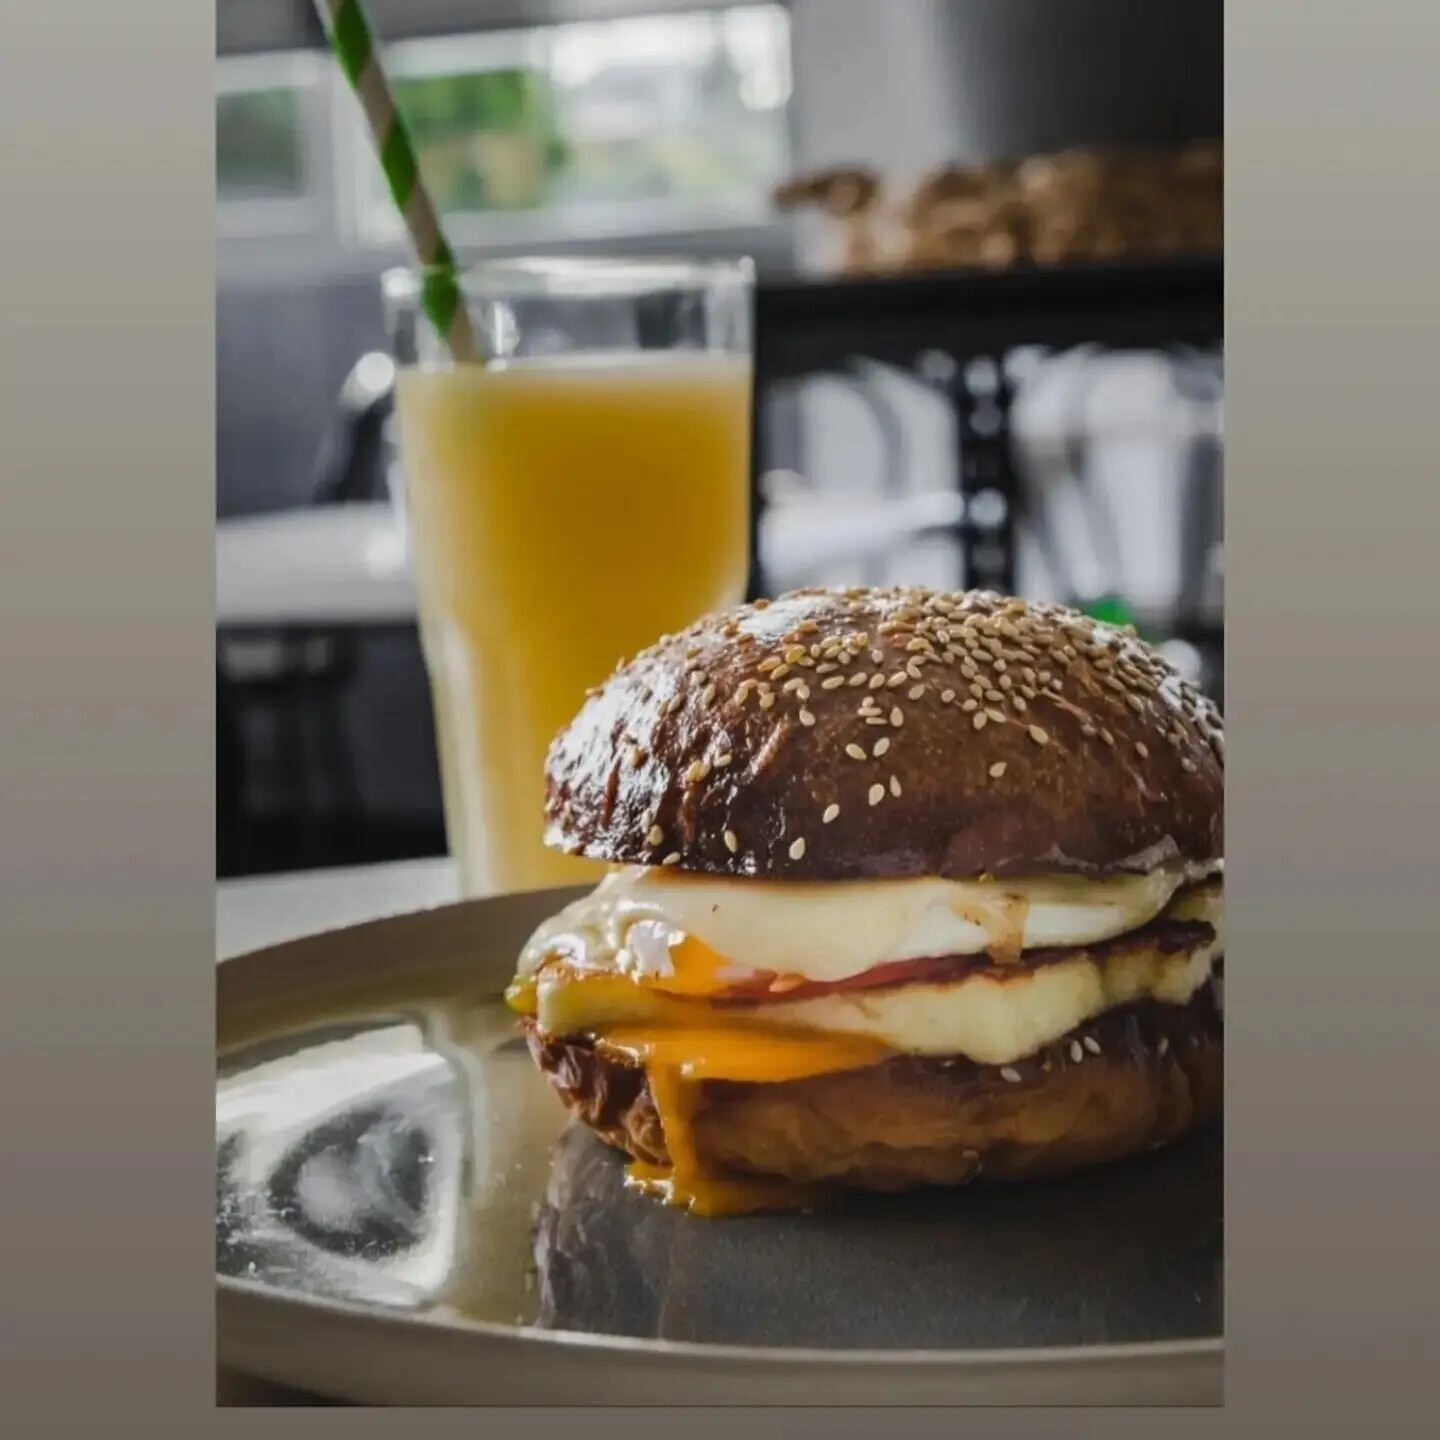 This is what long weekend dreams are made of 🙌
Open today, closed Monday
@silomedia - amazing capture 📸
.
.
.
.
#cafe #cafesofinstagram #cafesoflaunceston #cafelive #cafelove #brioche #eggandbaconroll #halloumiroll #sogood #freshjuice #freshlysquee